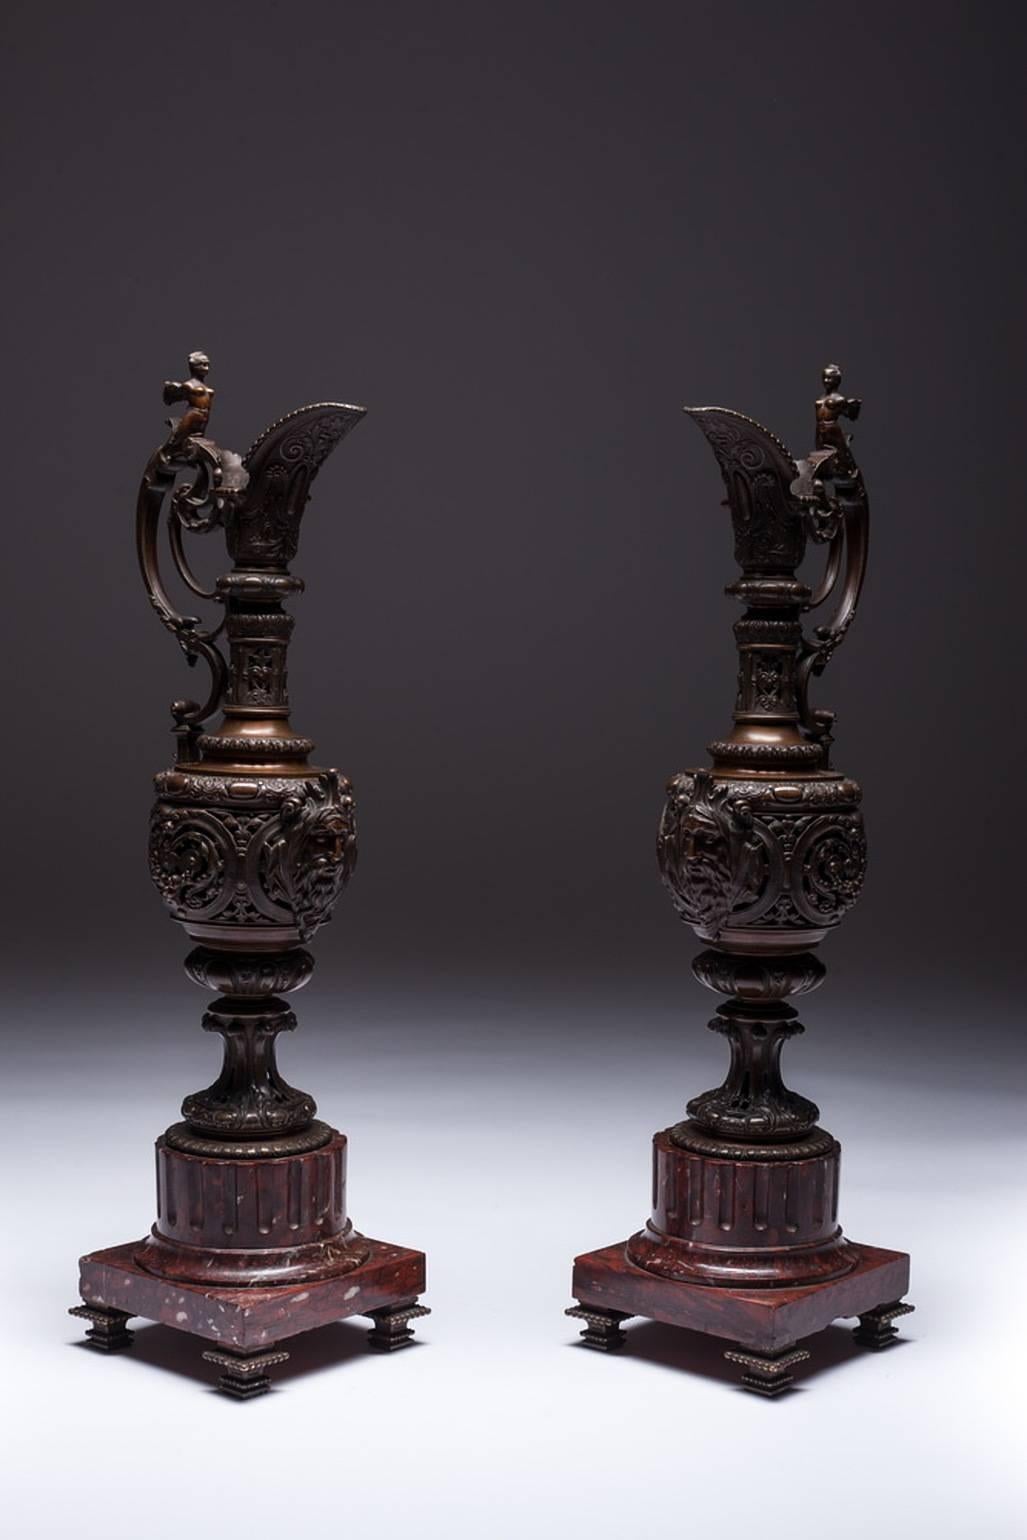 Pair of decorative Rocaille ewers in bronze with brown patina on red marble bases. Great condition, France, Napoleon III period. 
· Period: Of the period
Napoleon III
· Place of origin
France
· Date of manufacture
circa 1860
· Period
Late 19th